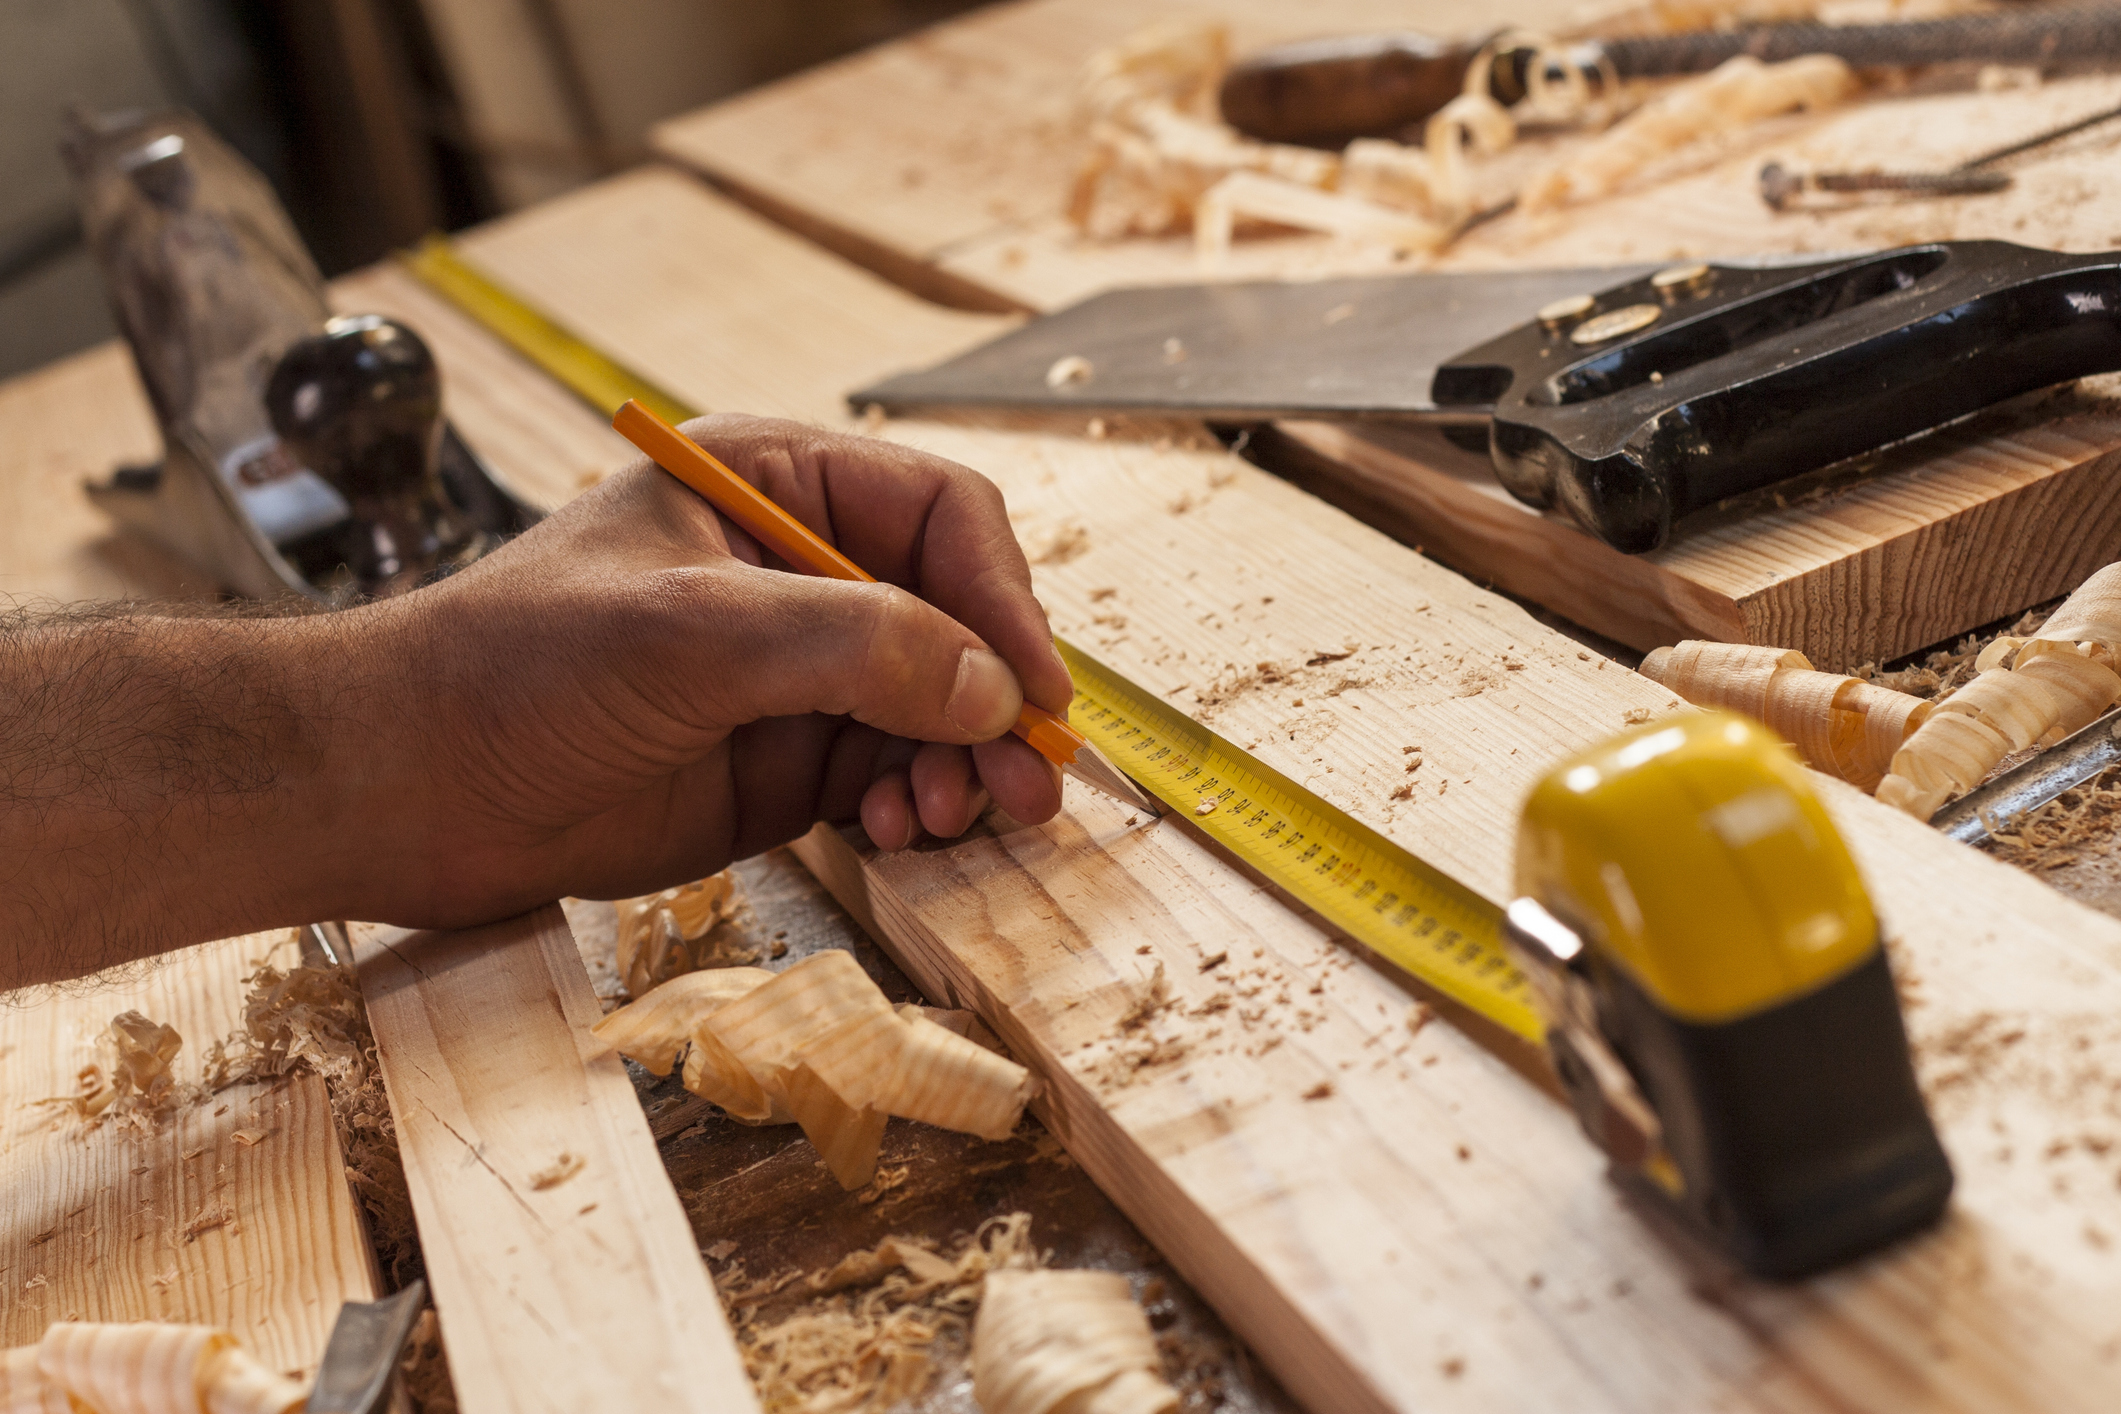 A new 10-week carpentry course will begin this July at Wharton County Junior College's Bay City campus.